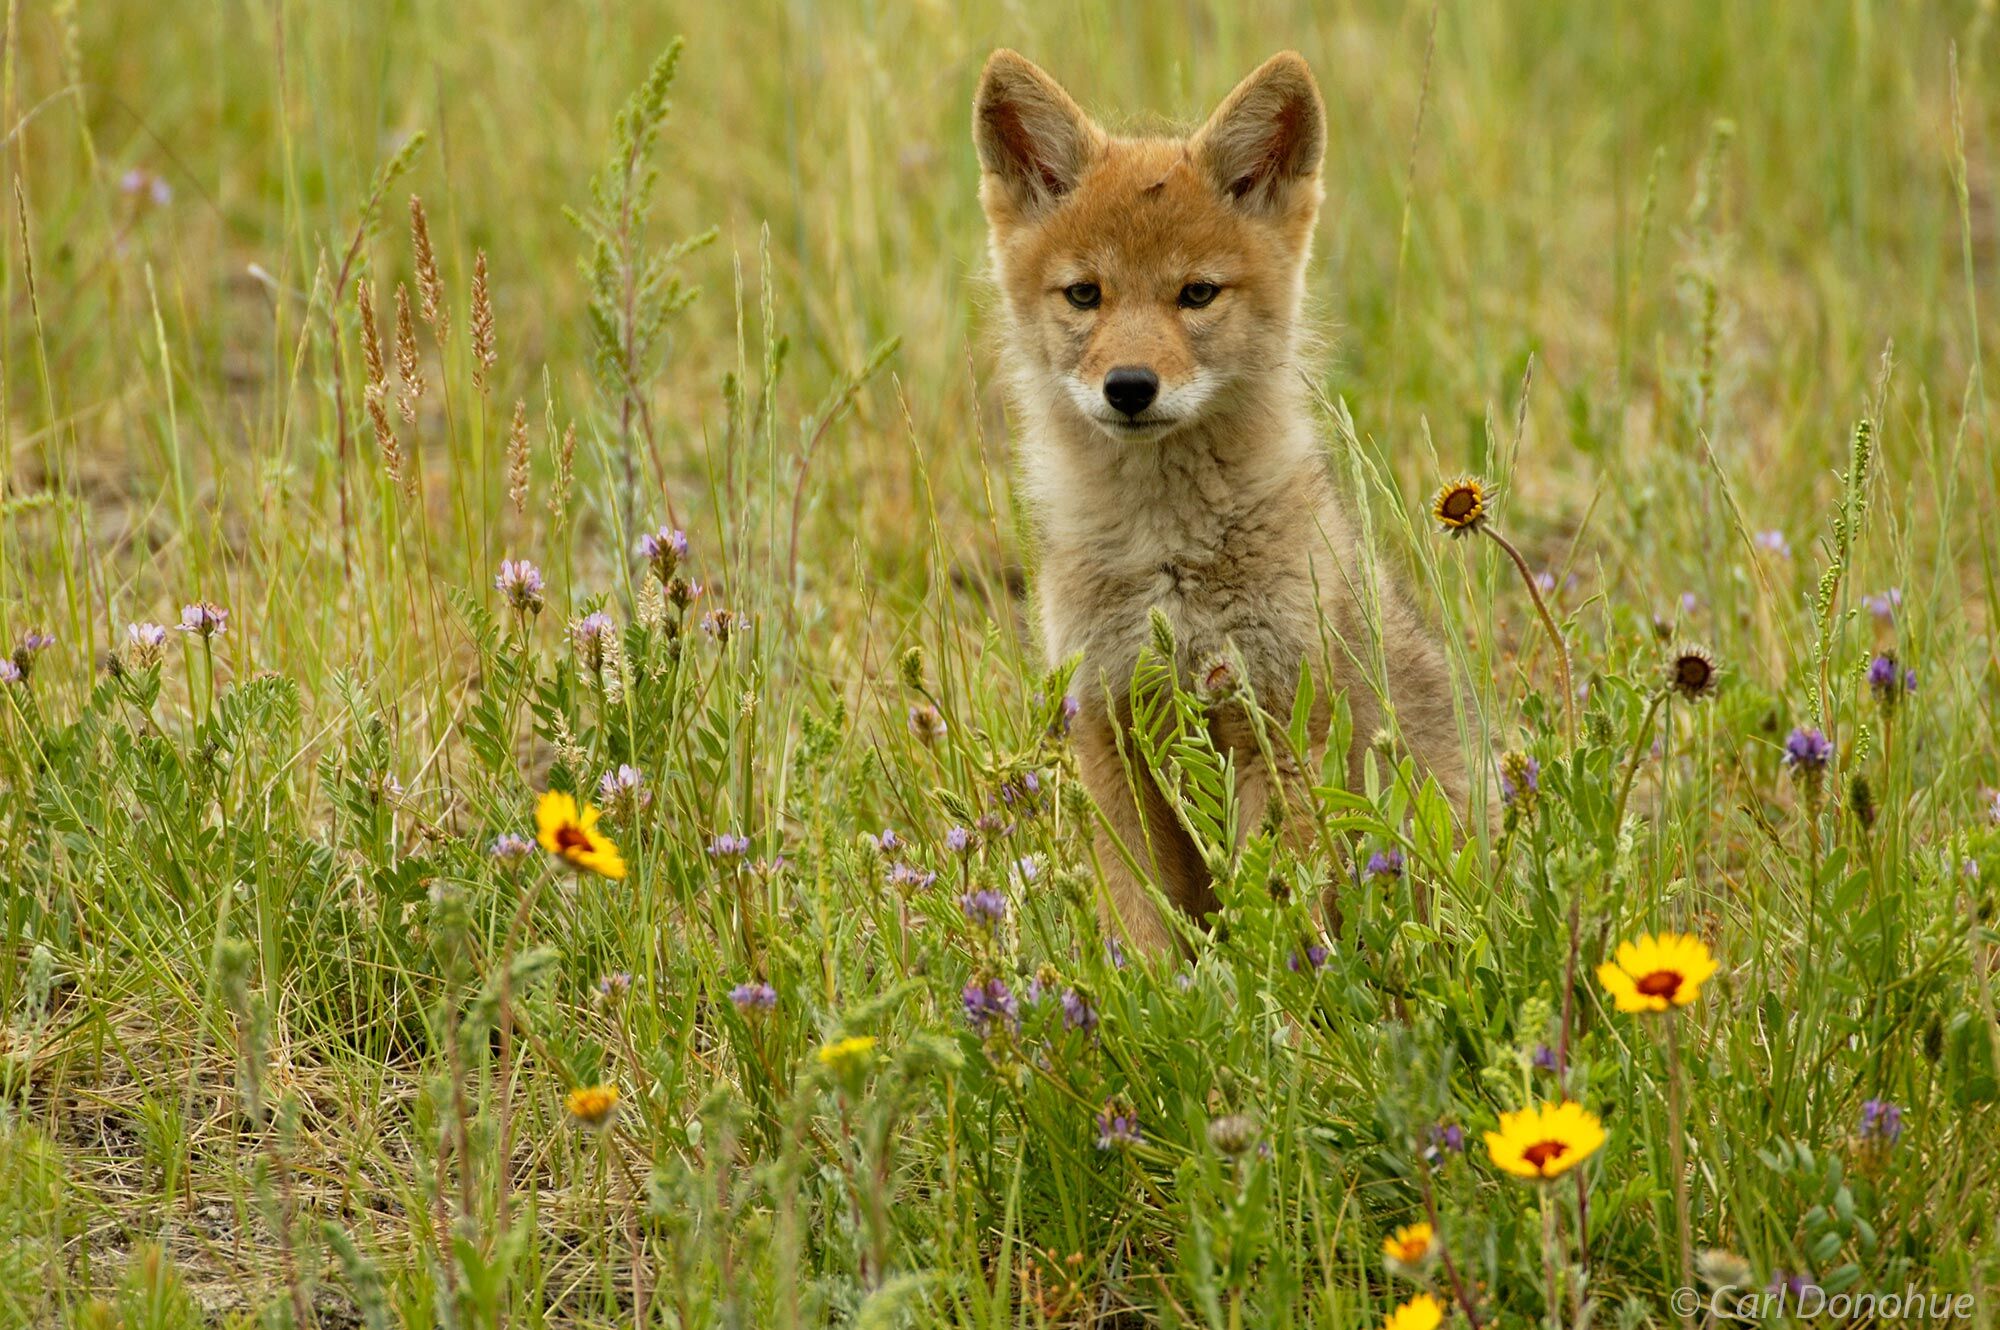 Coyote pup sitting beside yellow daisies, Jasper National Park, Canada.